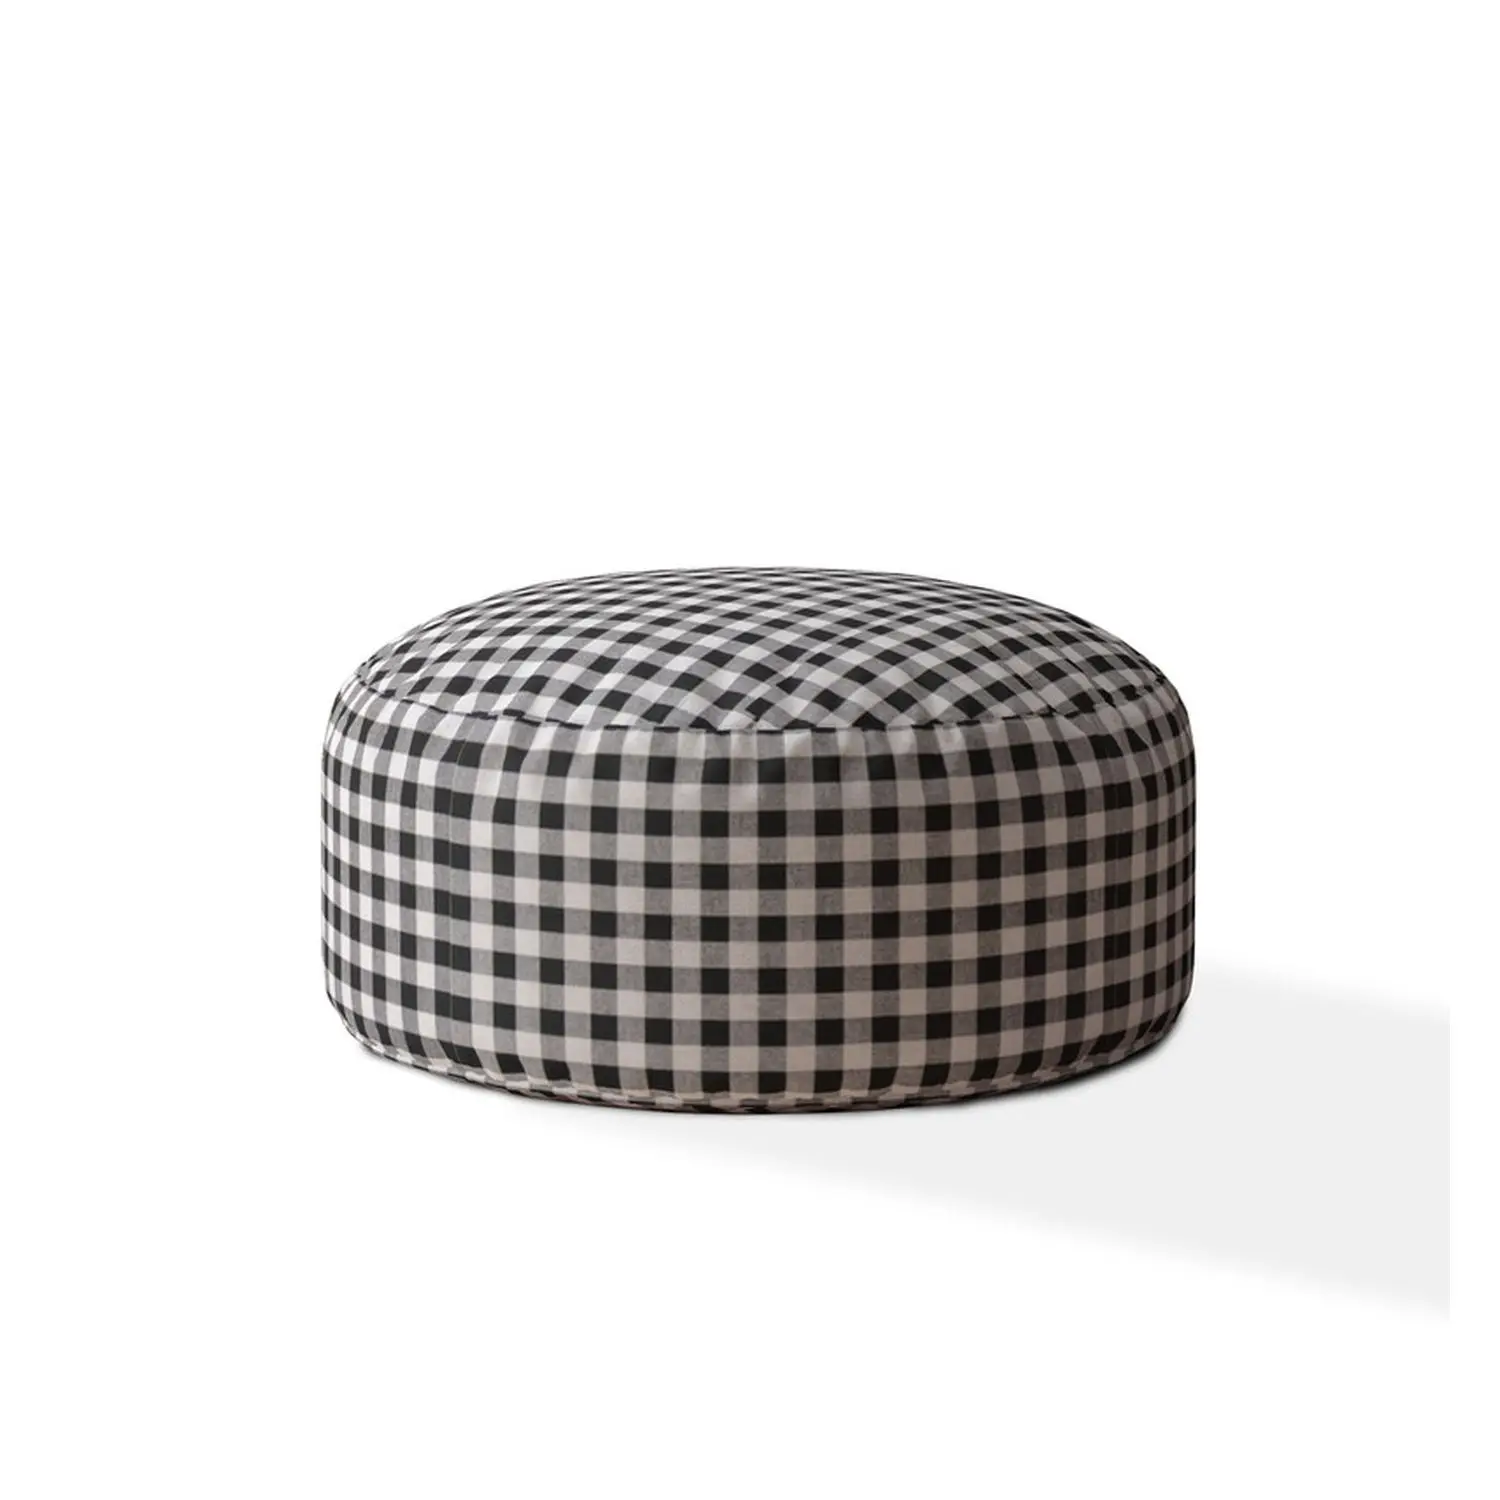 

PLAIDO Black Round Zipper Pouf - Stylish Indoor Cover Only - 20in tall x 24in dia - Comfortable and Chic Addition to Your Home